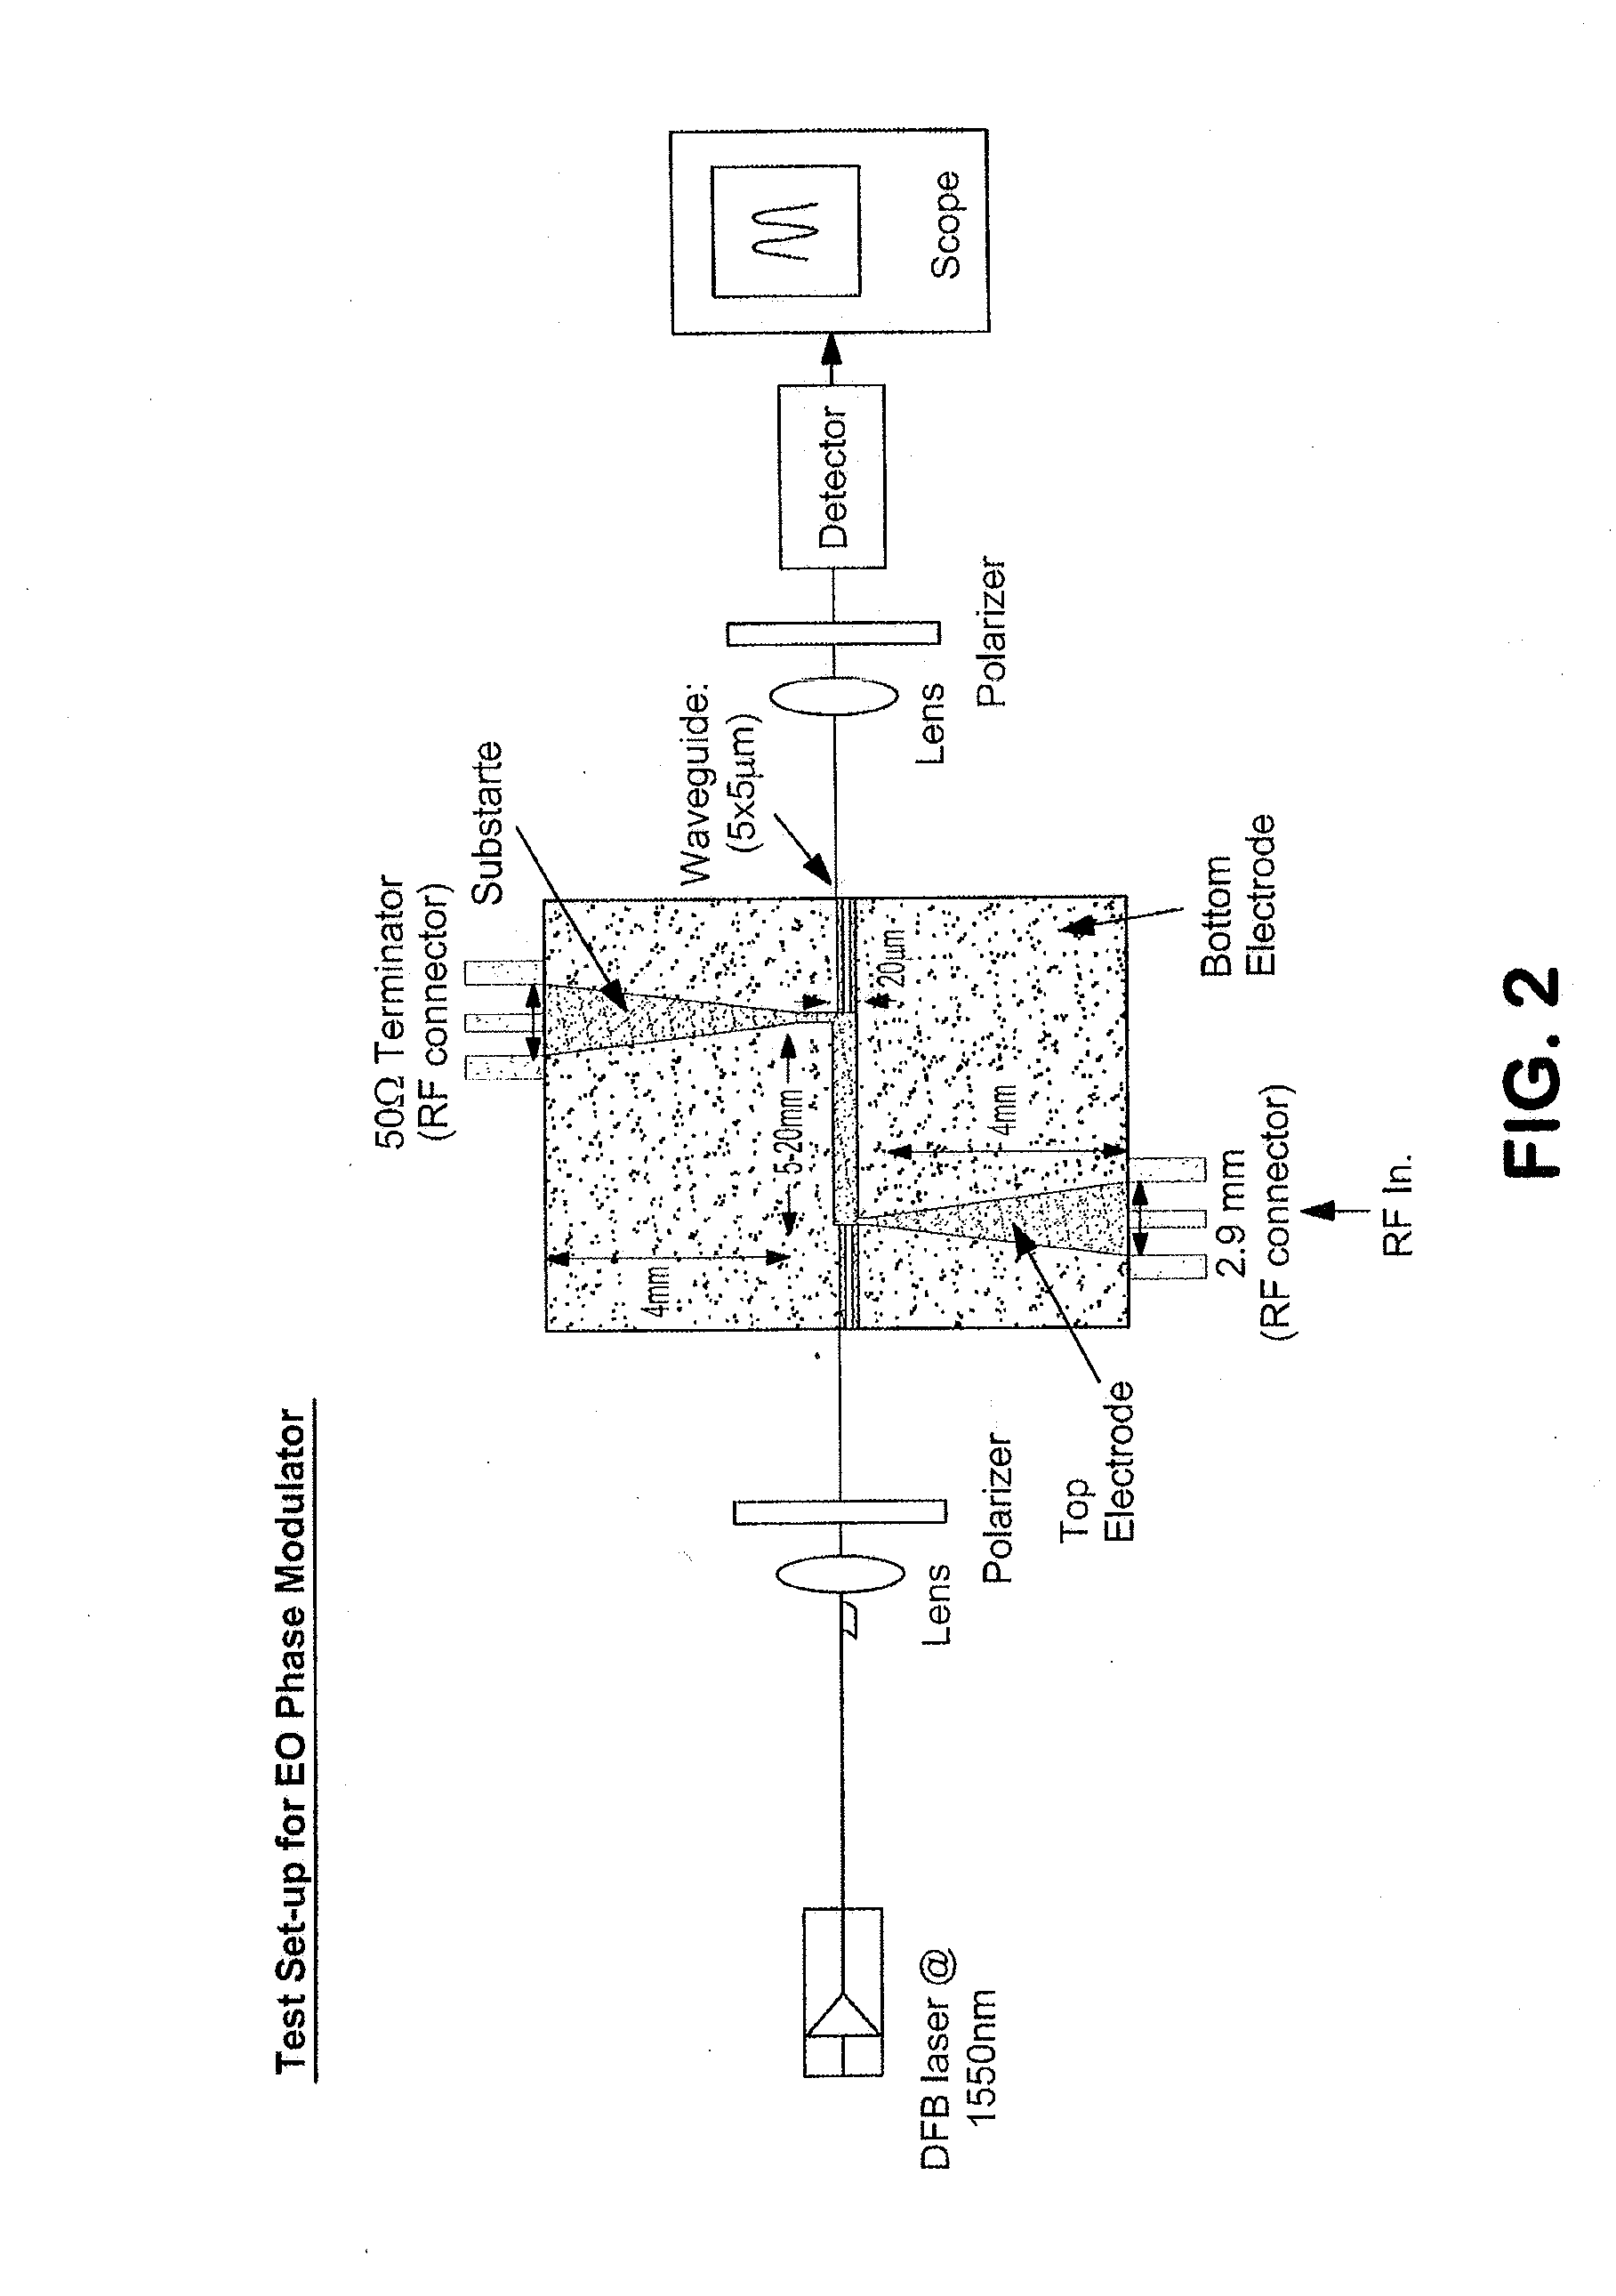 Stable Free Radical Chromophores and Mixtures Thereof, Processes for Preparing the Same, Nonlinear Optic Materials, and Uses Thereof in Nonlinear Optical Applications